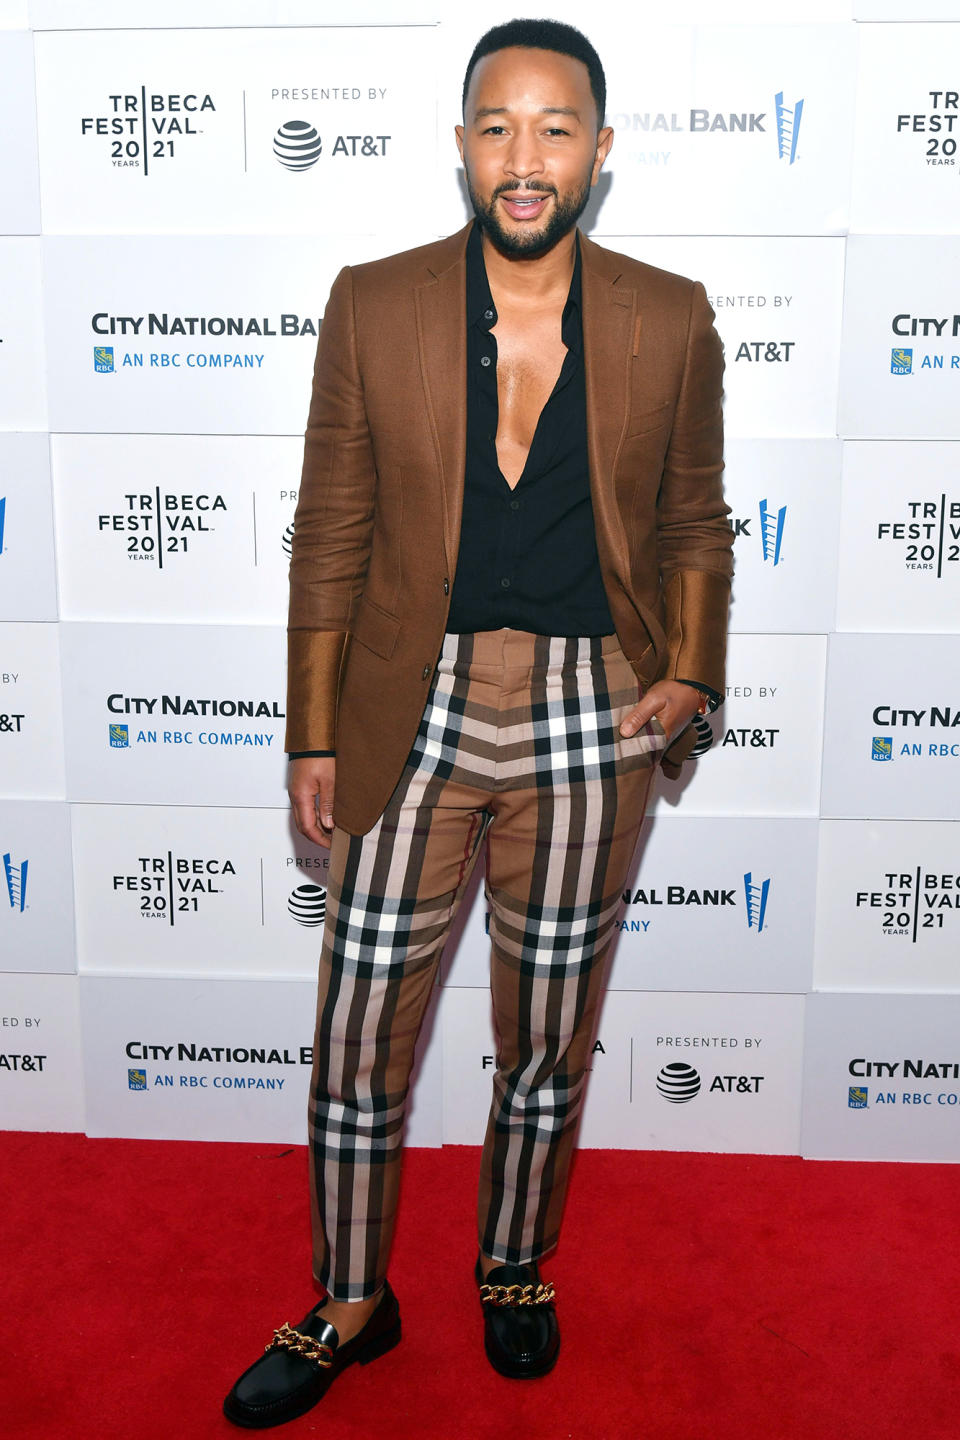 <p>John Legend attends the premiere of<i> Legends of the Underground</i>, which he co-executive produced, at the Tribeca Film Festival on June 10 in N.Y.C. </p>